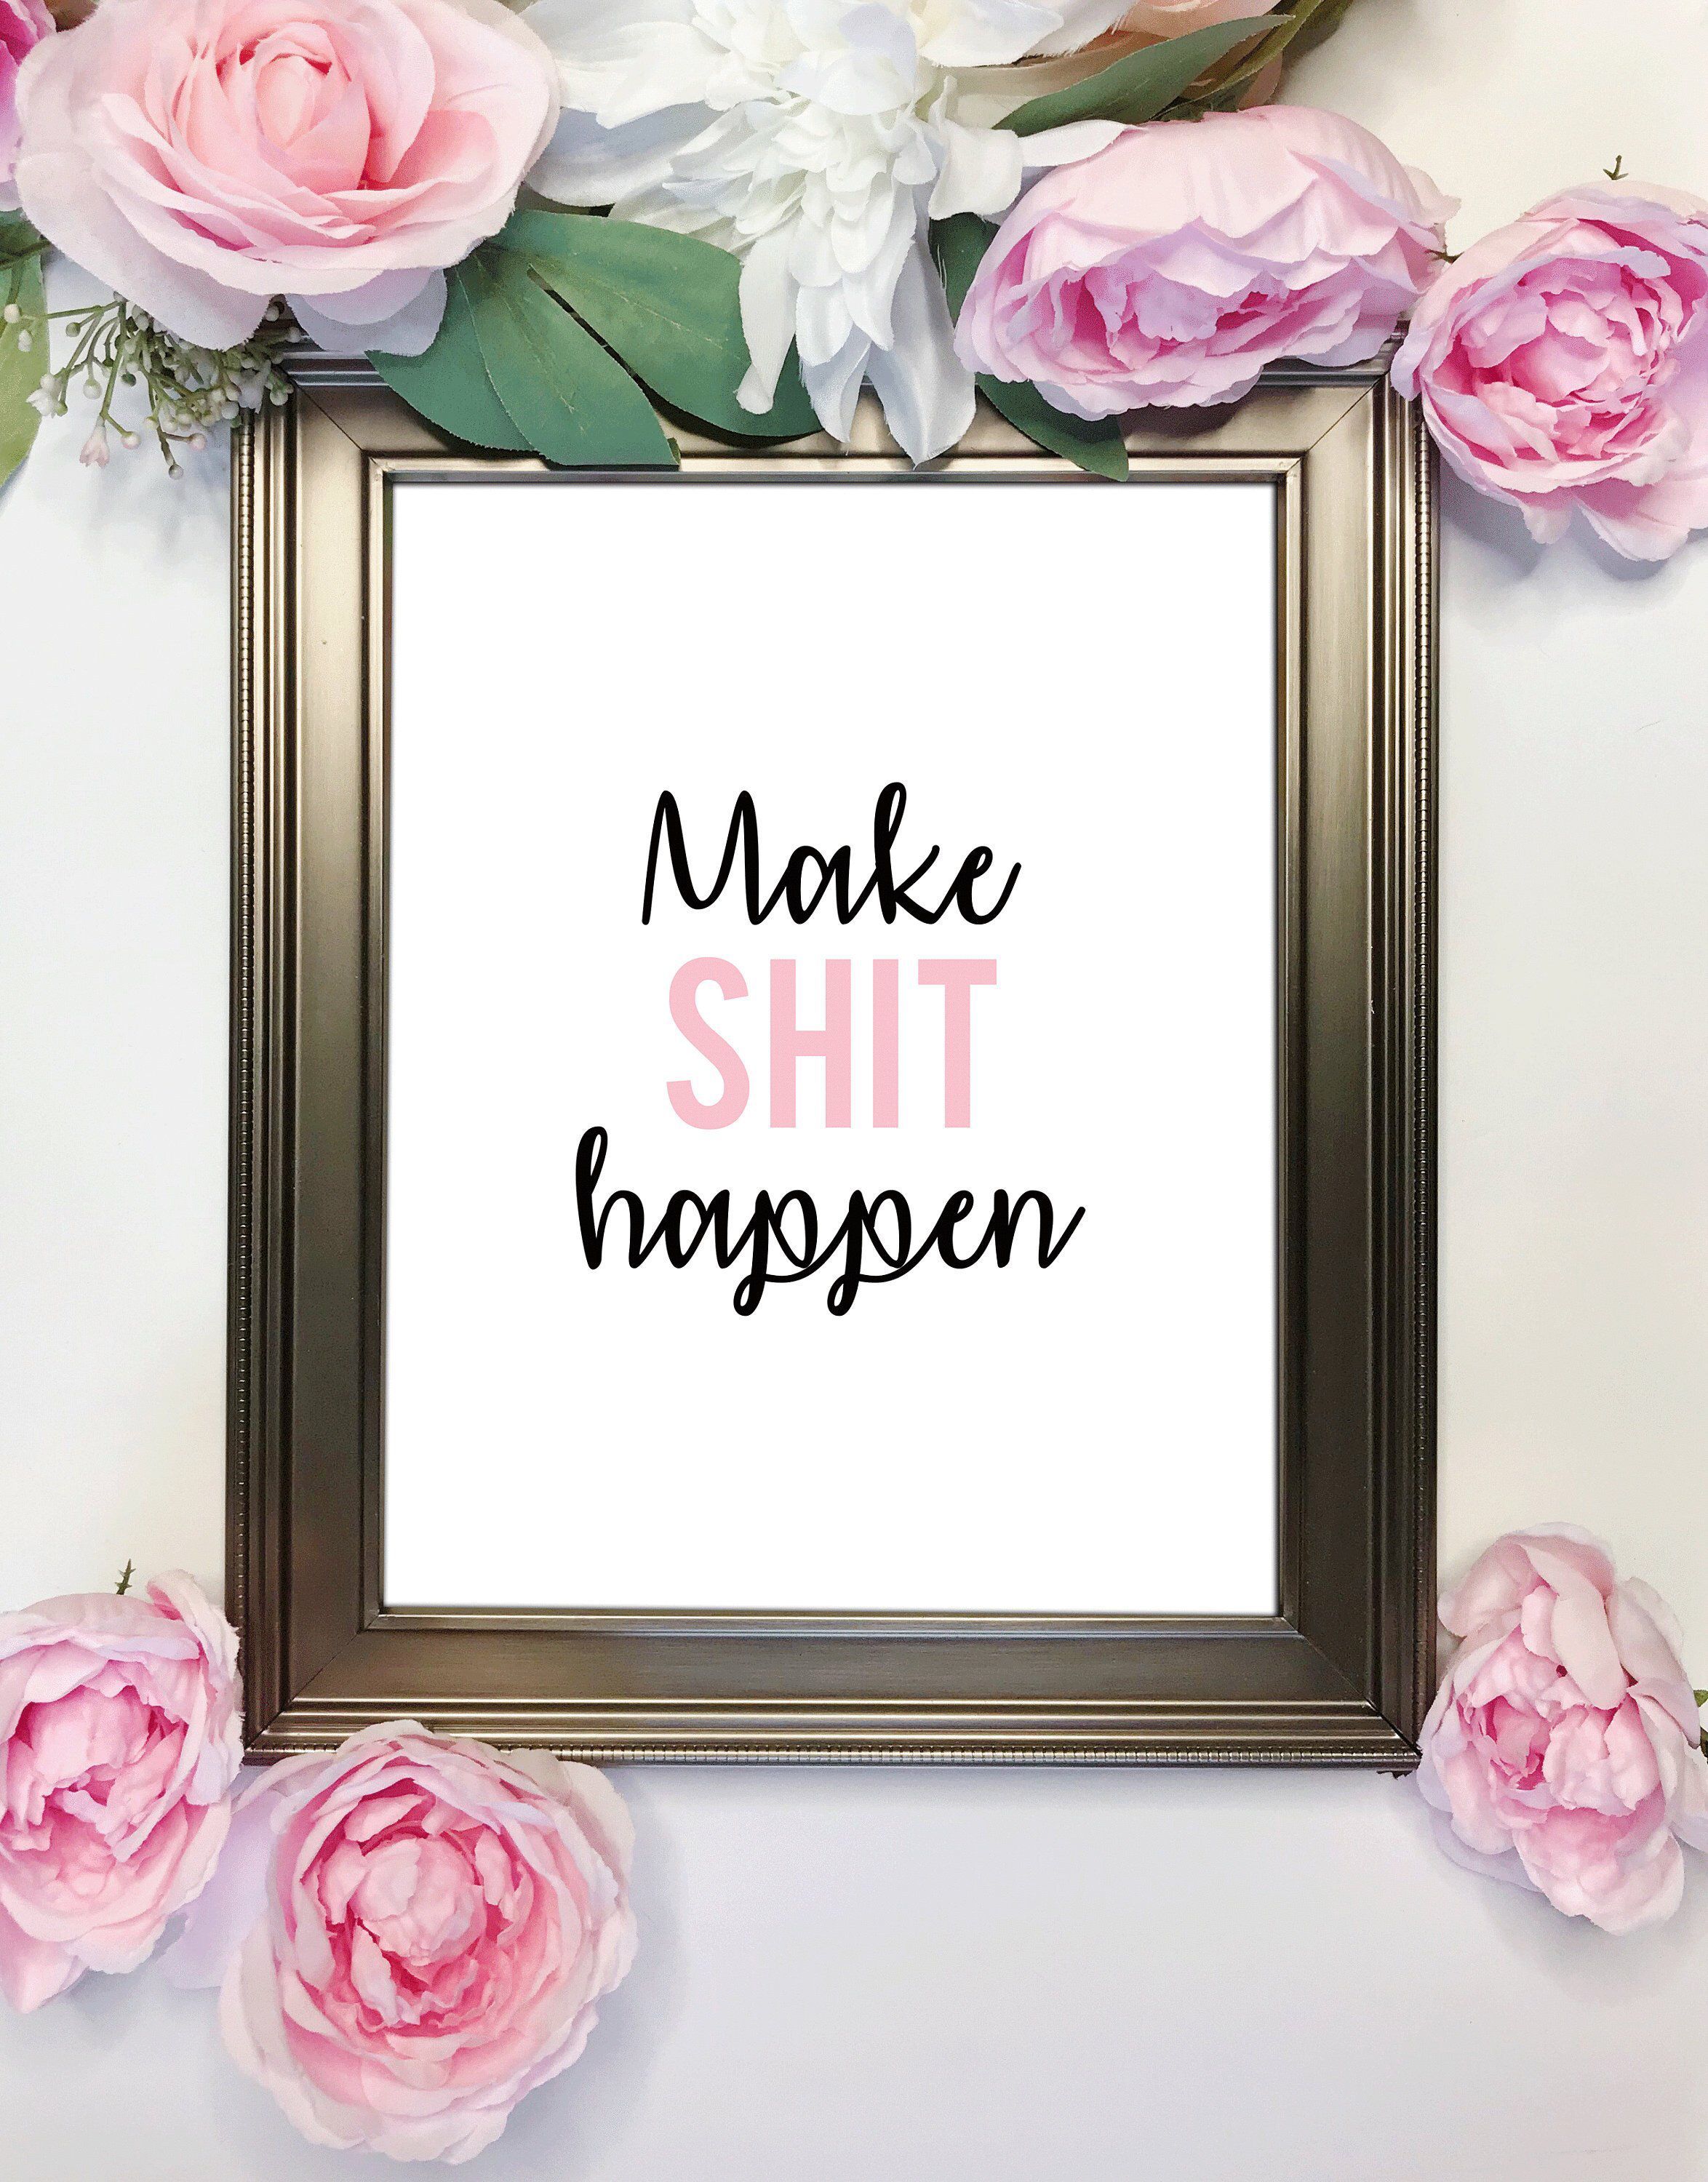 Make shit happen, Wall Printable, Wall Art, Instant Download, Inspirational Quote, Girl Boss, Slay Decor, Chic wall art, girl boss decor -   11 room decor Chic girly ideas